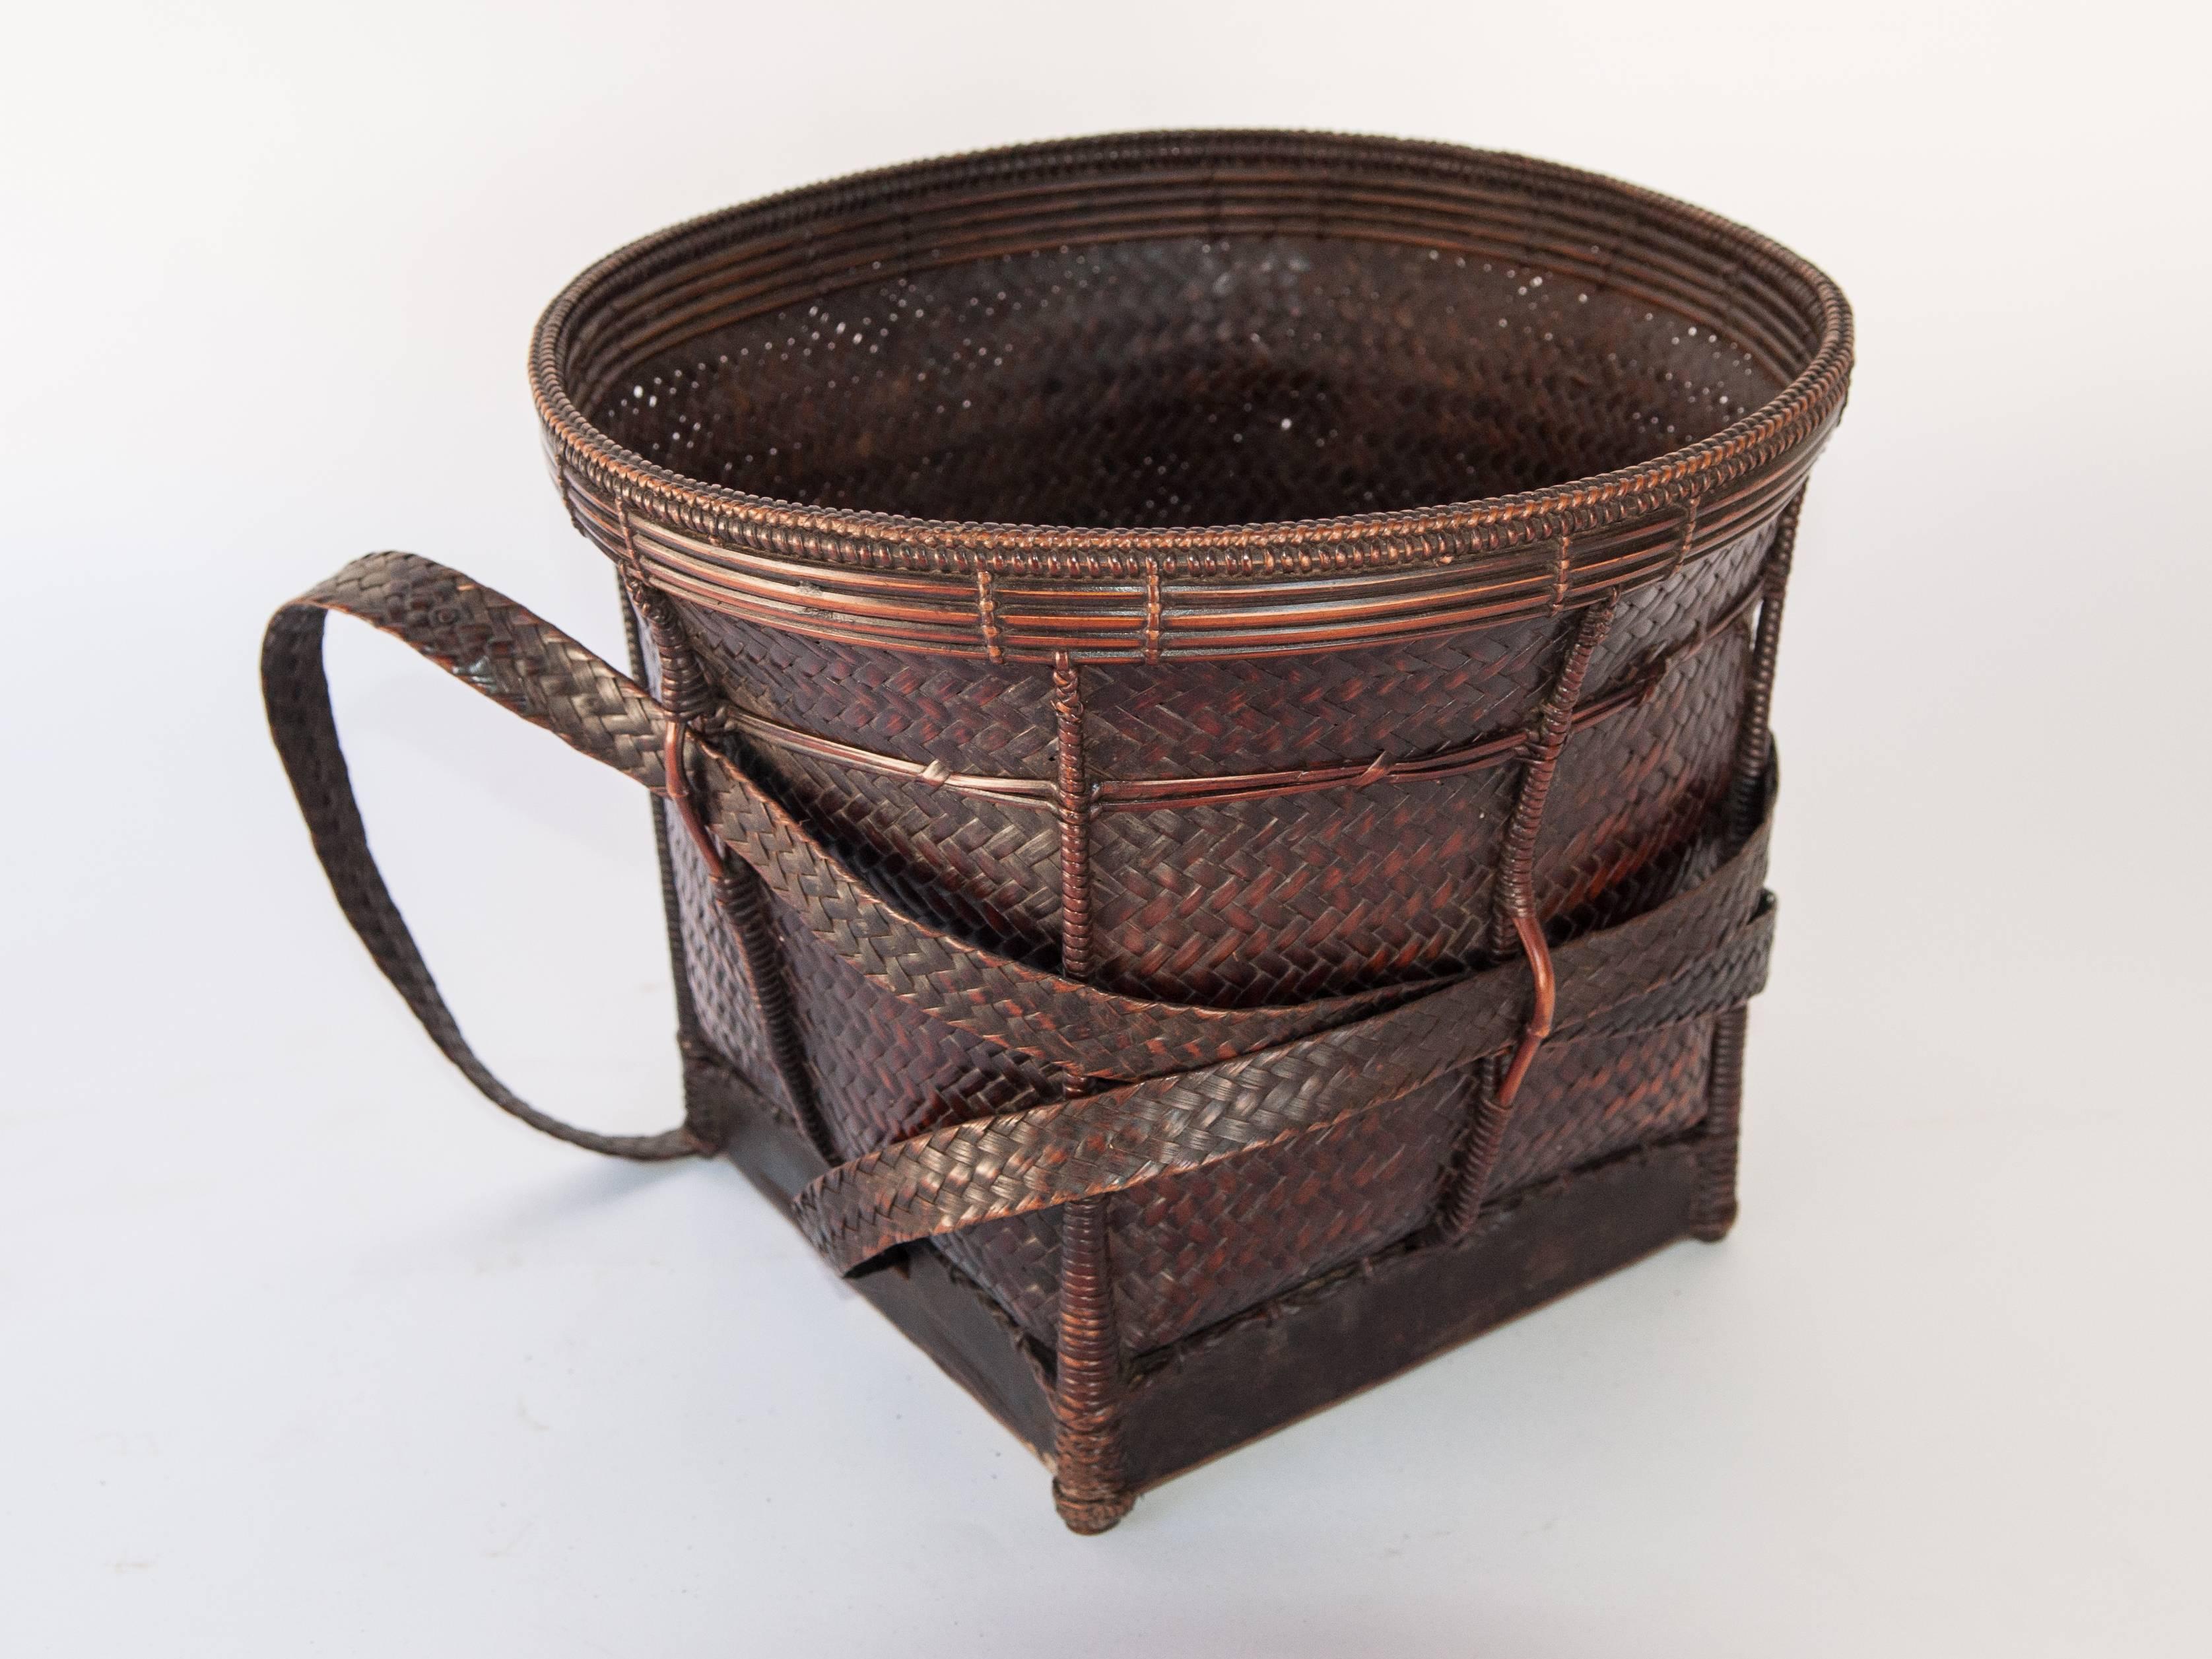 Vintage collecting basket from the Ata Pue area of Laos. Mid-20th century, Bamboo, rattan.
Offered by Bruce Hughes.
This sturdy and finely woven basket is from the Ata Pue area of Laos, and possesses a lovely rich patina. Laotians are highly